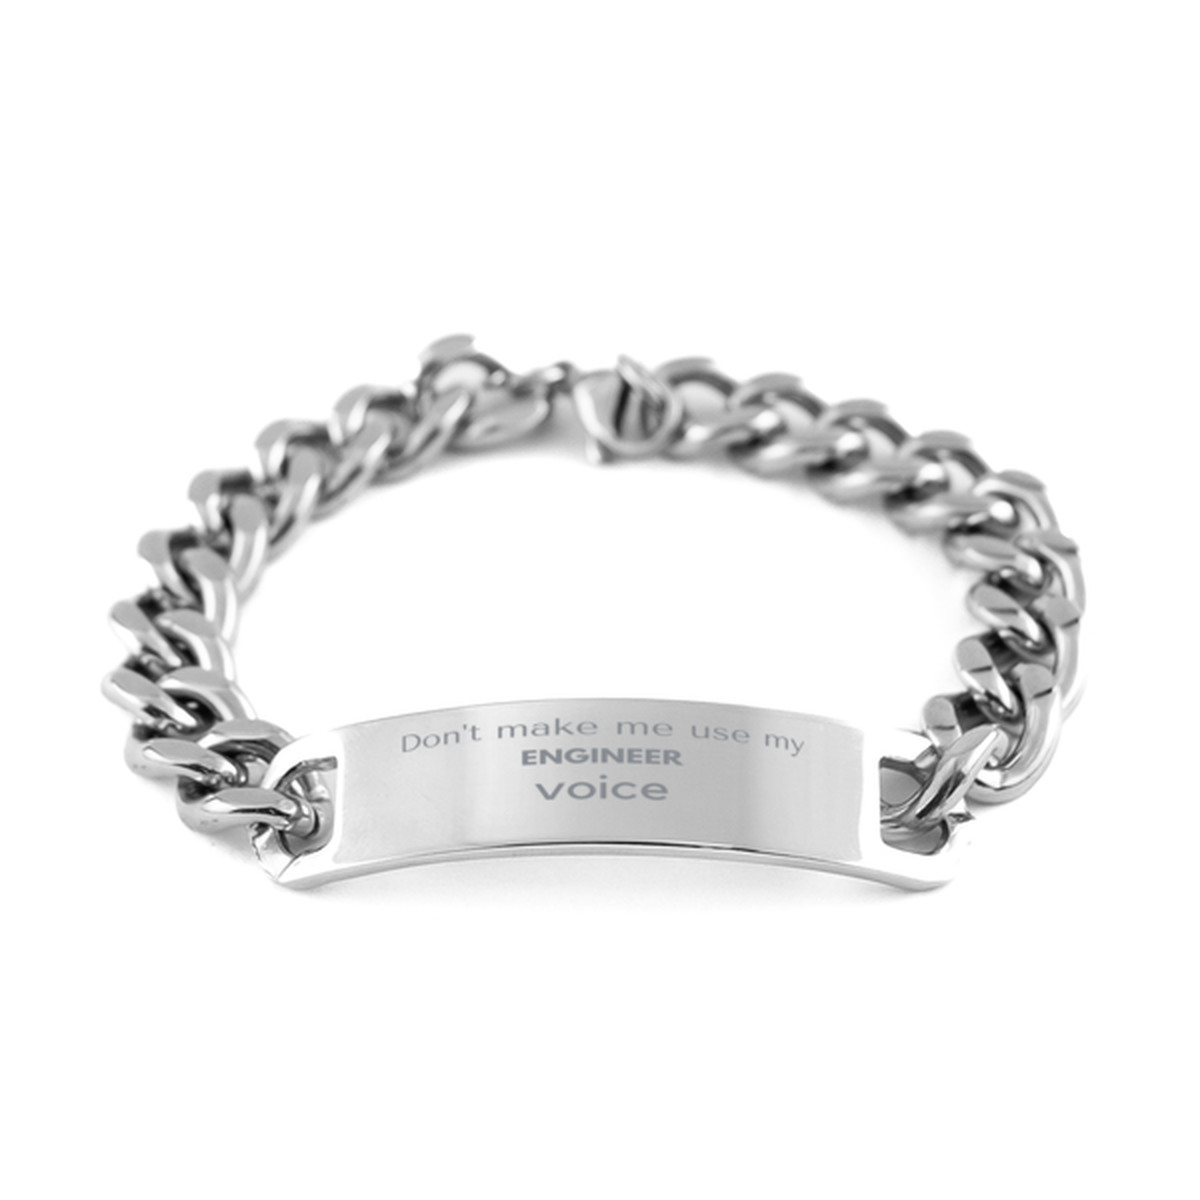 Don't make me use my Engineer voice, Sarcasm Engineer Gifts, Christmas Engineer Cuban Chain Stainless Steel Bracelet Birthday Unique Gifts For Engineer Coworkers, Men, Women, Colleague, Friends